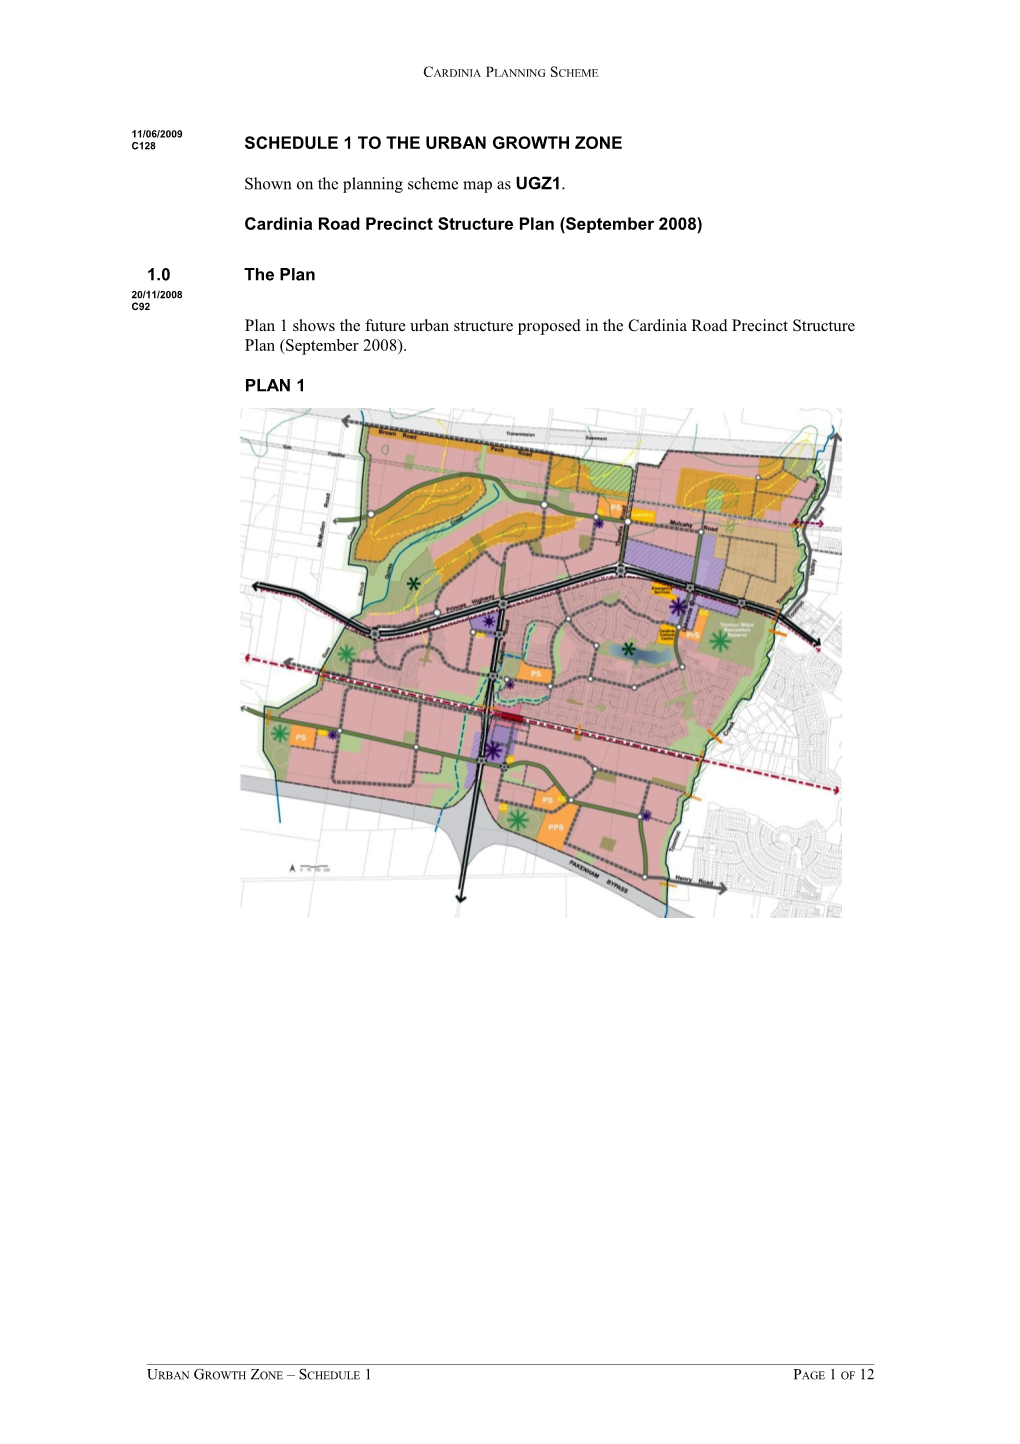 Shown on the Planning Scheme Map As UGZ1